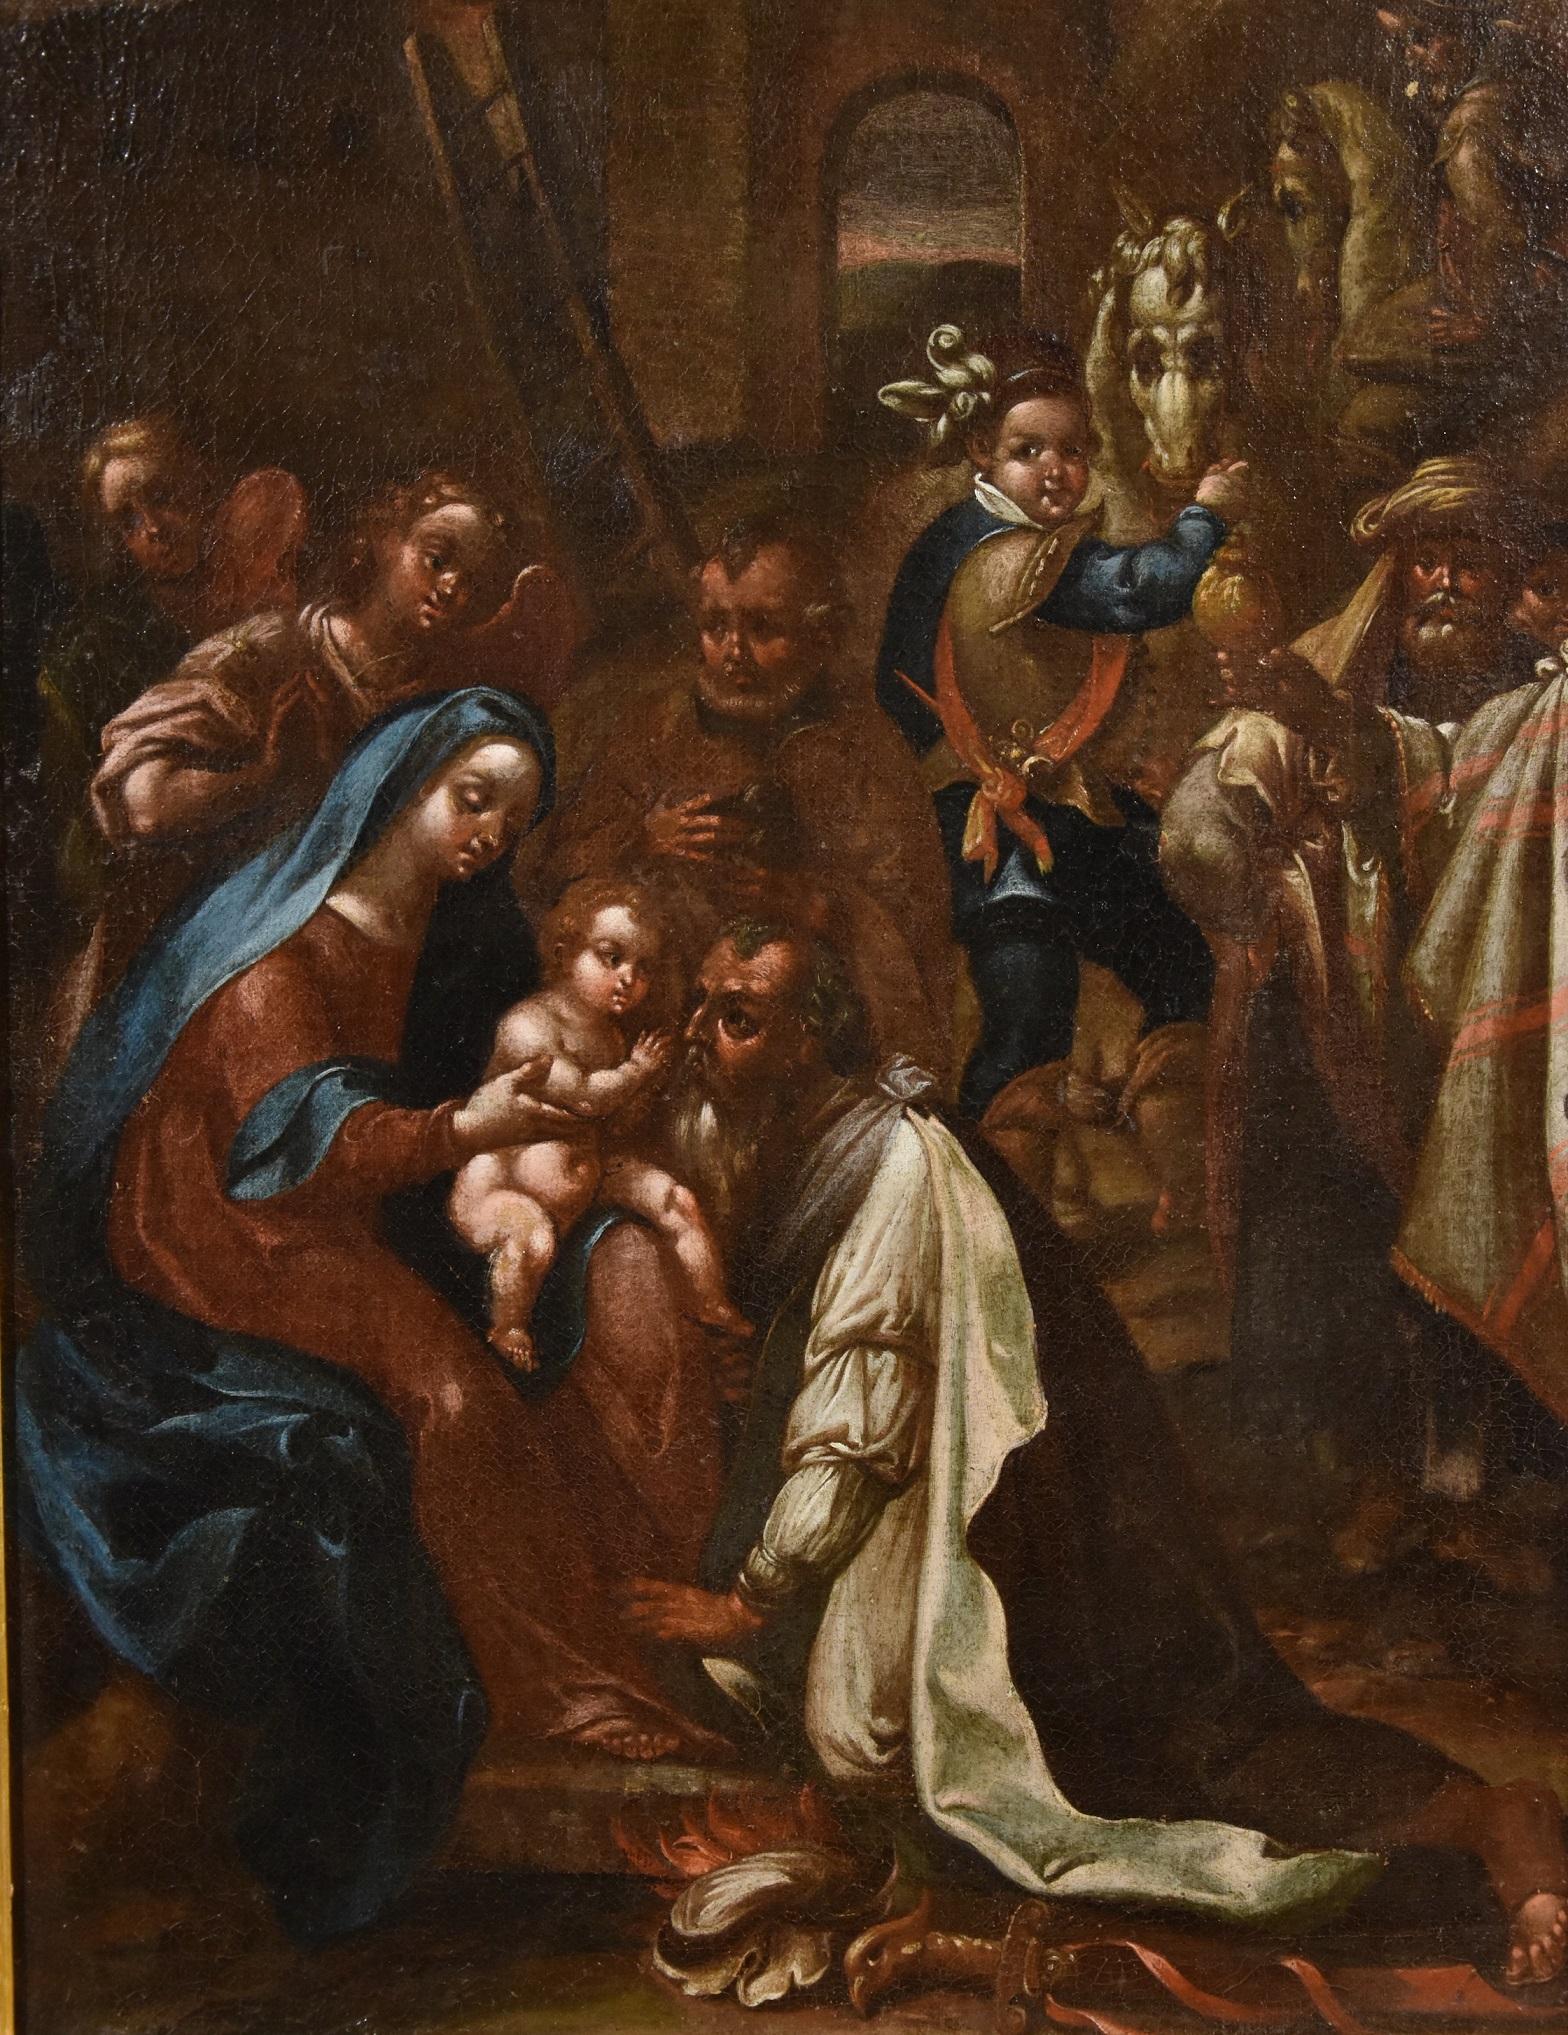 Jan Van der Straet, known as Giovanni Stradano (Bruges 1523 - Florence 1605), Workshop of
The Adoration of the Magi

late 16th century - early 17th century
oil painting on canvas
Measurements: 72 x 60 cm. - with frame 86 x 74 cm.

The proposed